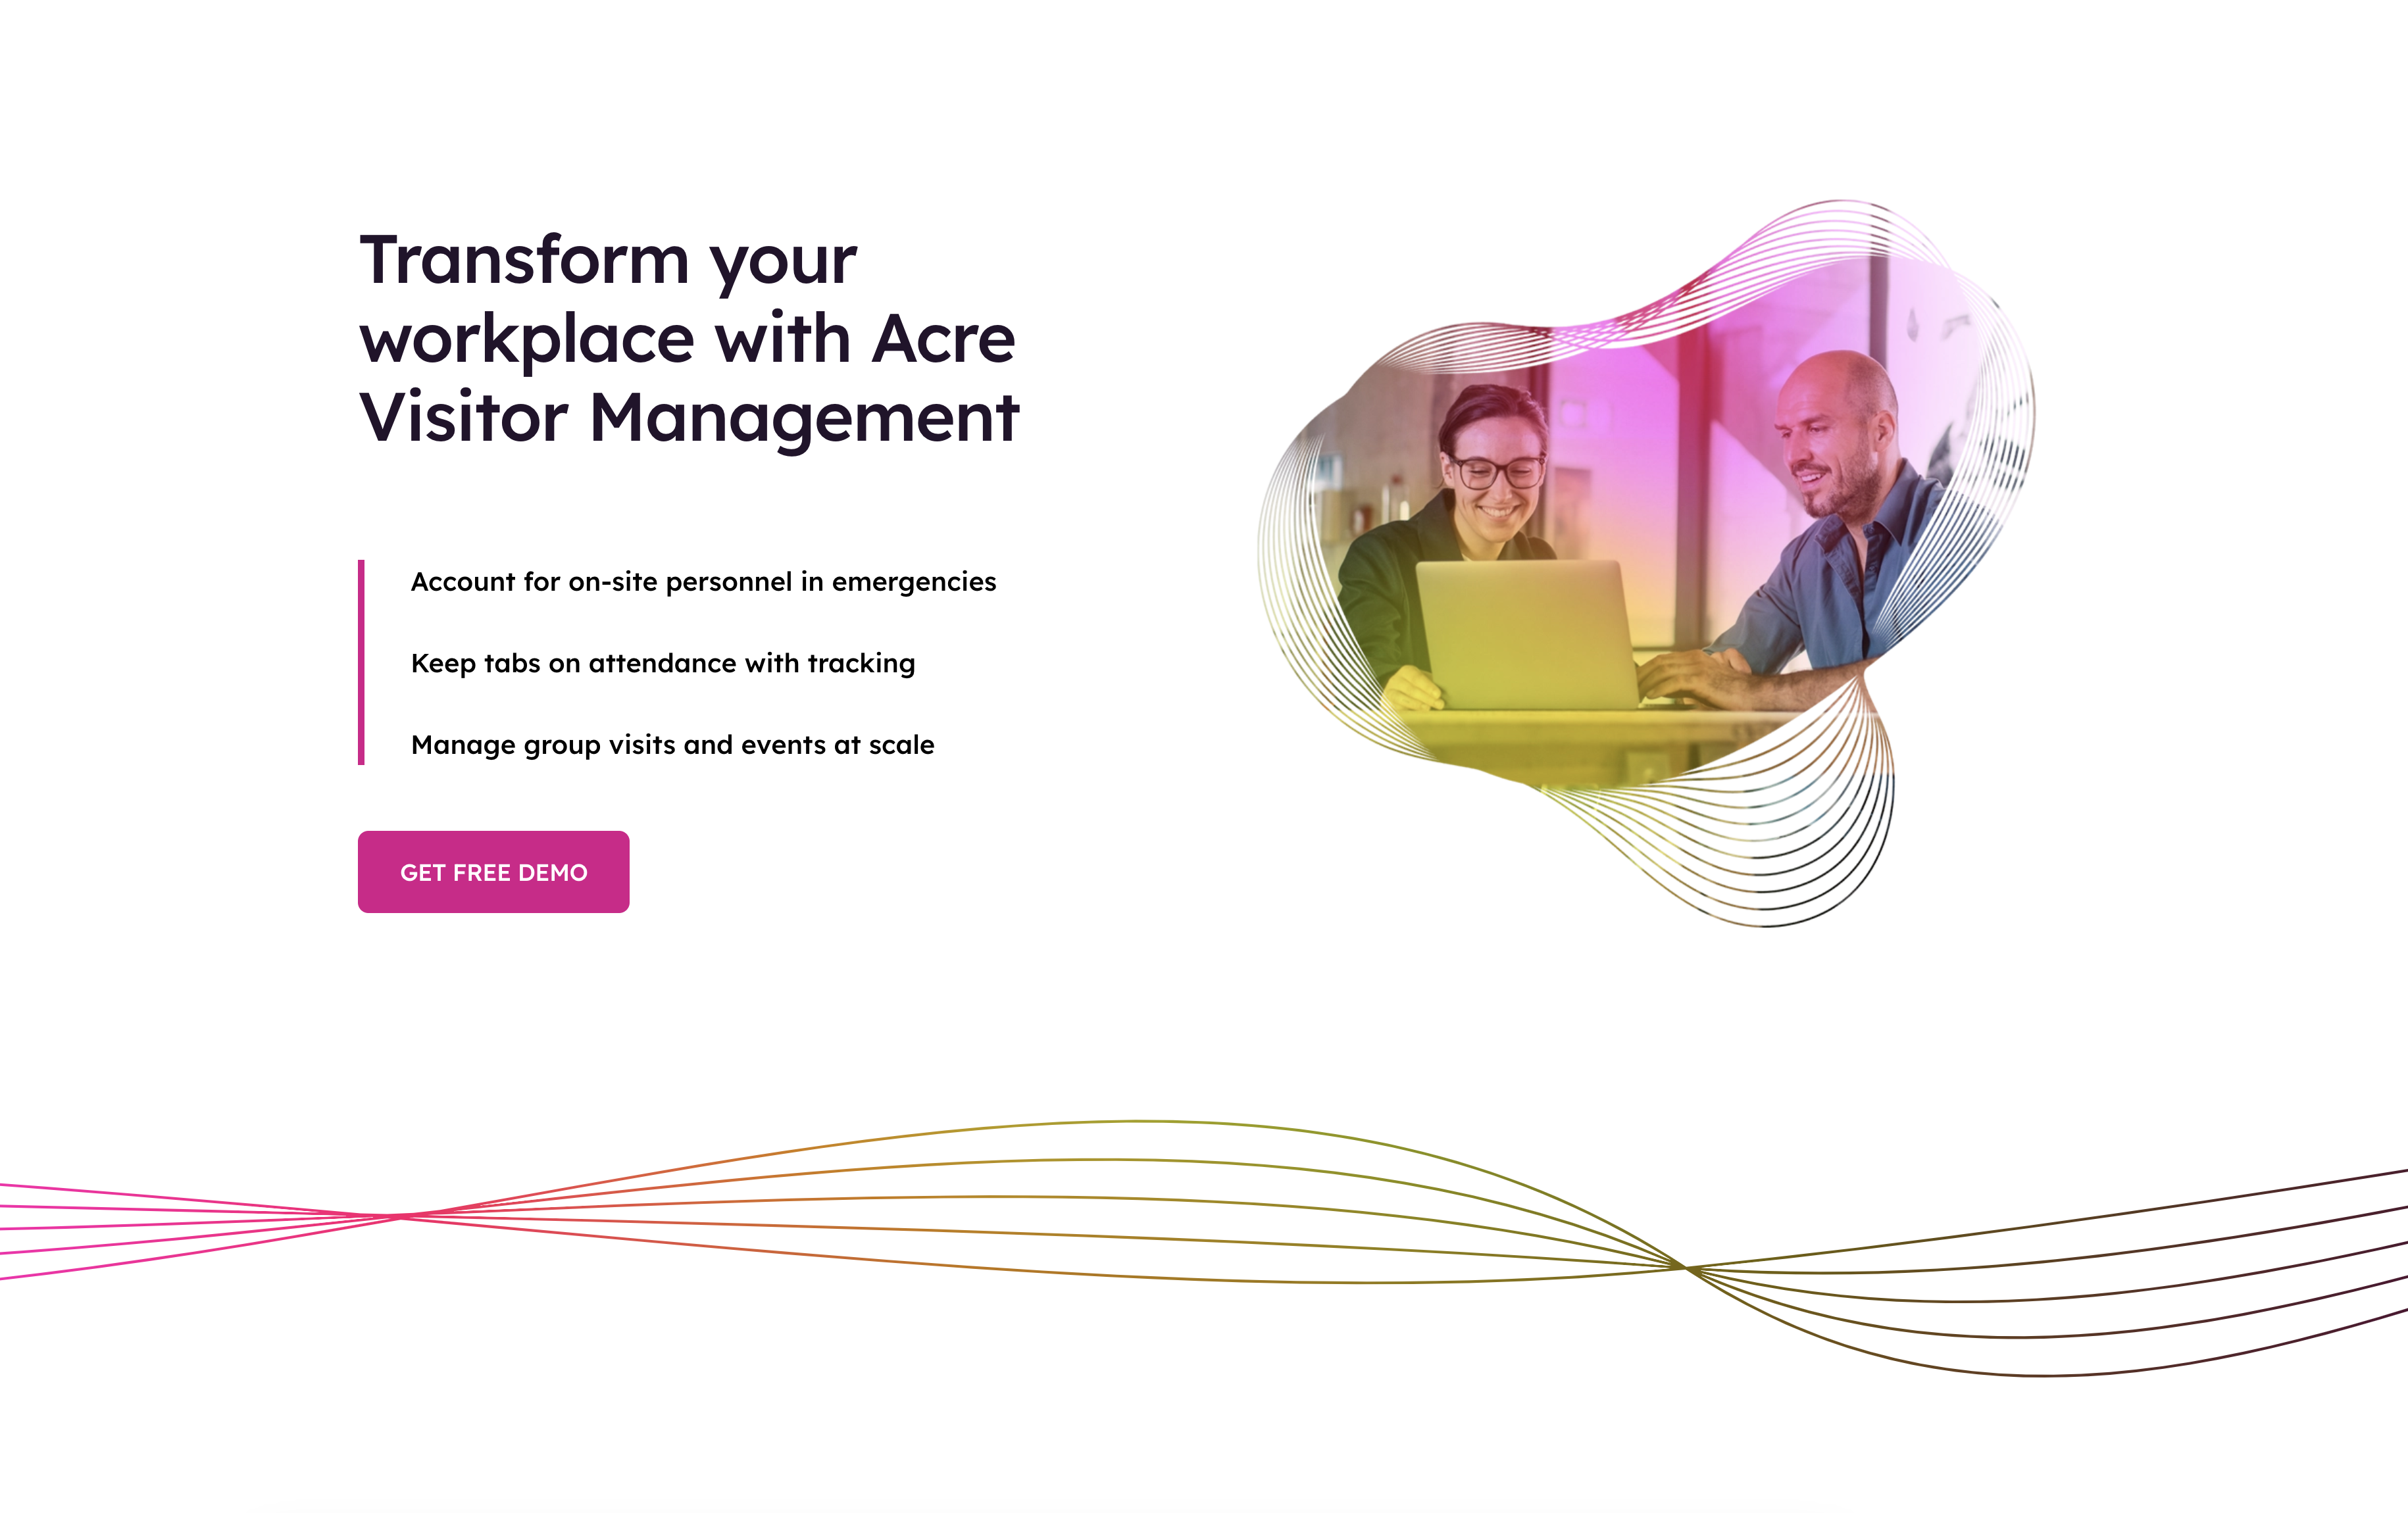 Transform your workplace with Acre Visitor Management